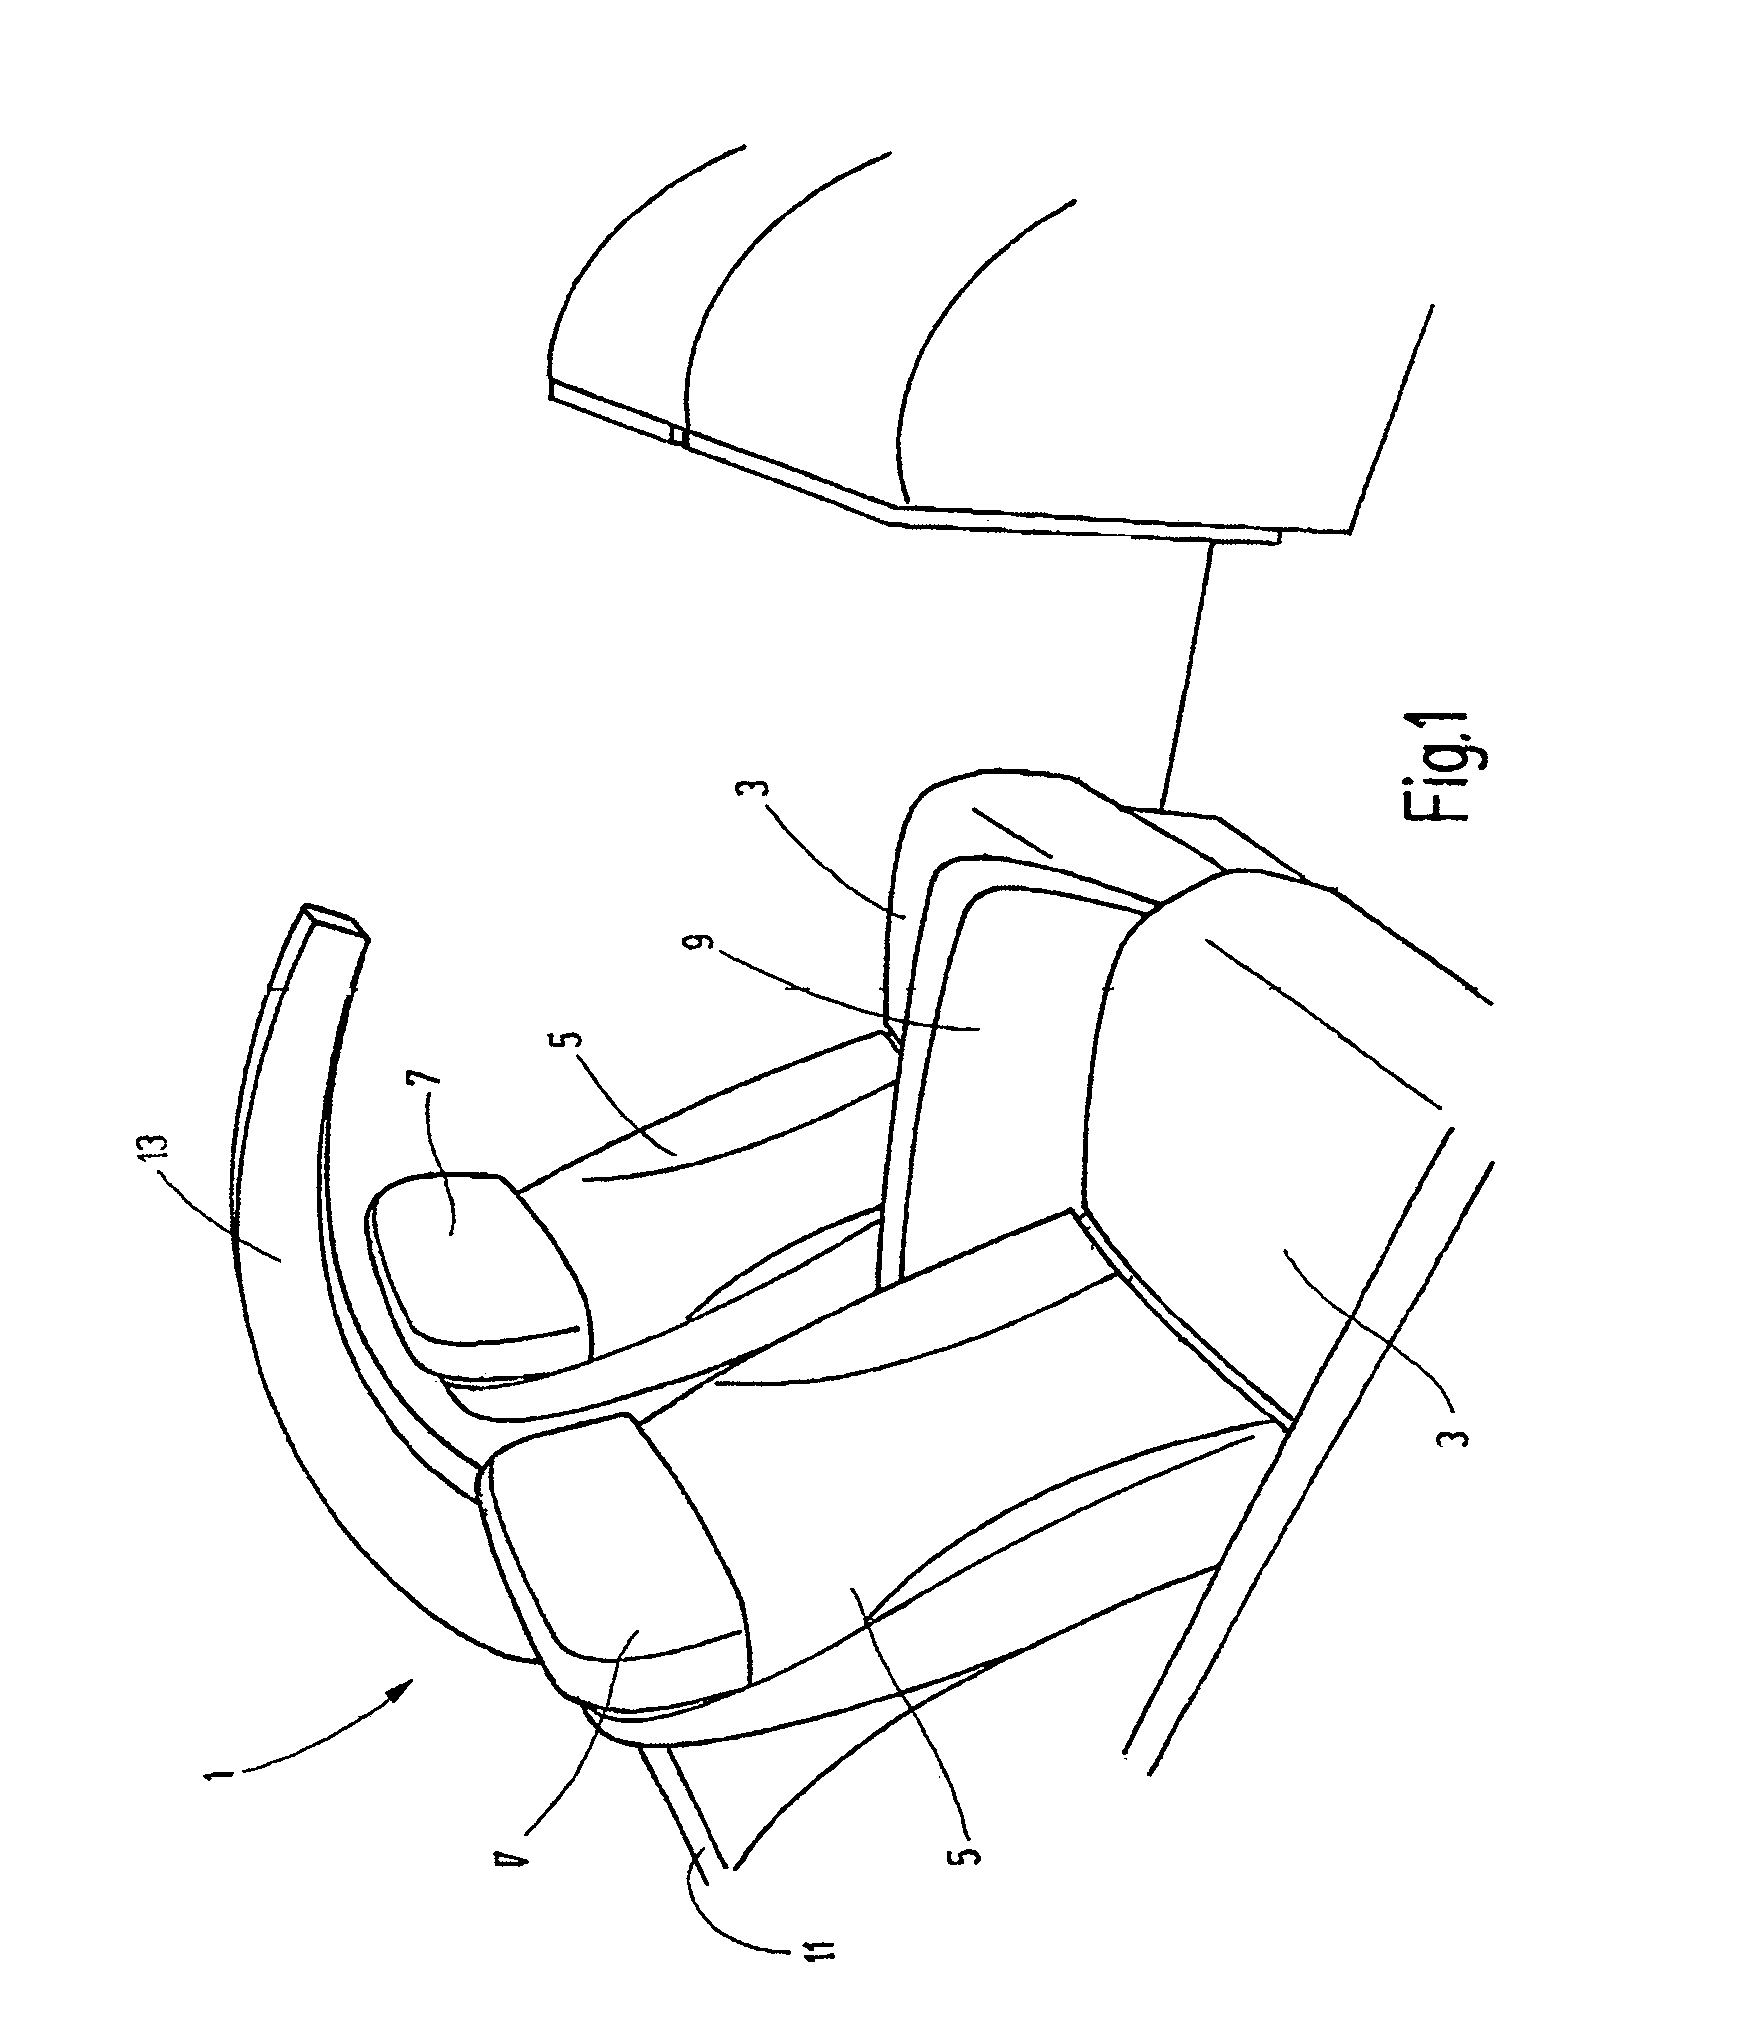 Vehicle seat system, especially for aircraft